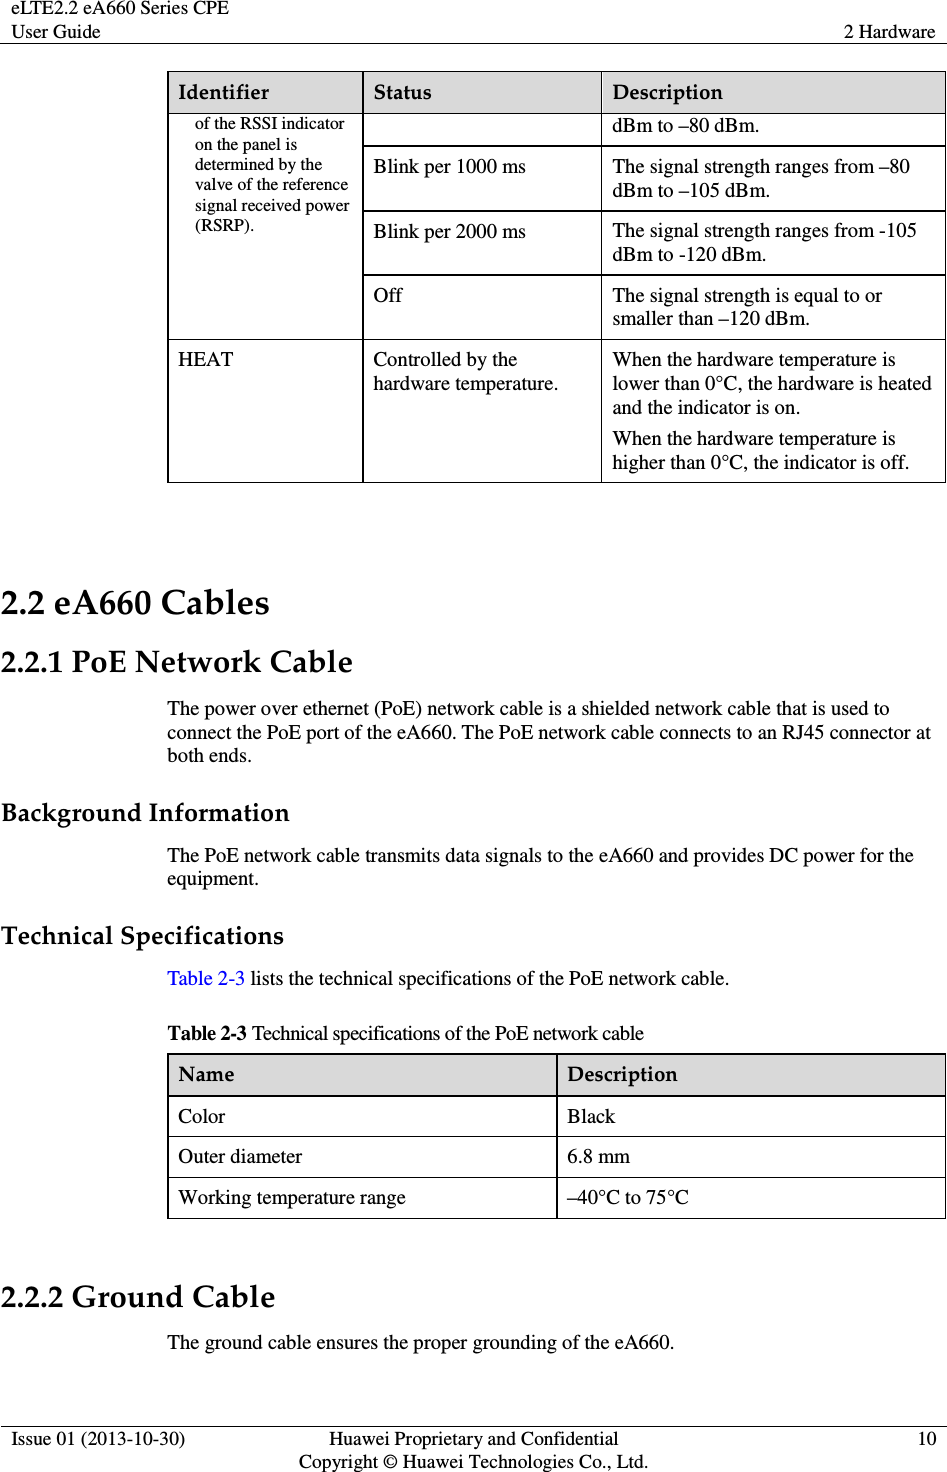 eLTE2.2 eA660 Series CPE User Guide  2 Hardware  Issue 01 (2013-10-30)  Huawei Proprietary and Confidential                                     Copyright © Huawei Technologies Co., Ltd. 10  Identifier  Status  Description of the RSSI indicator on the panel is determined by the valve of the reference signal received power (RSRP). dBm to –80 dBm. Blink per 1000 ms  The signal strength ranges from –80 dBm to –105 dBm. Blink per 2000 ms  The signal strength ranges from -105 dBm to -120 dBm. Off  The signal strength is equal to or smaller than –120 dBm.   HEAT  Controlled by the hardware temperature. When the hardware temperature is lower than 0°C, the hardware is heated and the indicator is on.   When the hardware temperature is higher than 0°C, the indicator is off.  2.2 eA660 Cables 2.2.1 PoE Network Cable The power over ethernet (PoE) network cable is a shielded network cable that is used to connect the PoE port of the eA660. The PoE network cable connects to an RJ45 connector at both ends. Background Information The PoE network cable transmits data signals to the eA660 and provides DC power for the equipment. Technical Specifications Table 2-3 lists the technical specifications of the PoE network cable. Table 2-3 Technical specifications of the PoE network cable Name  Description Color  Black Outer diameter  6.8 mm Working temperature range  –40°C to 75°C  2.2.2 Ground Cable The ground cable ensures the proper grounding of the eA660. 